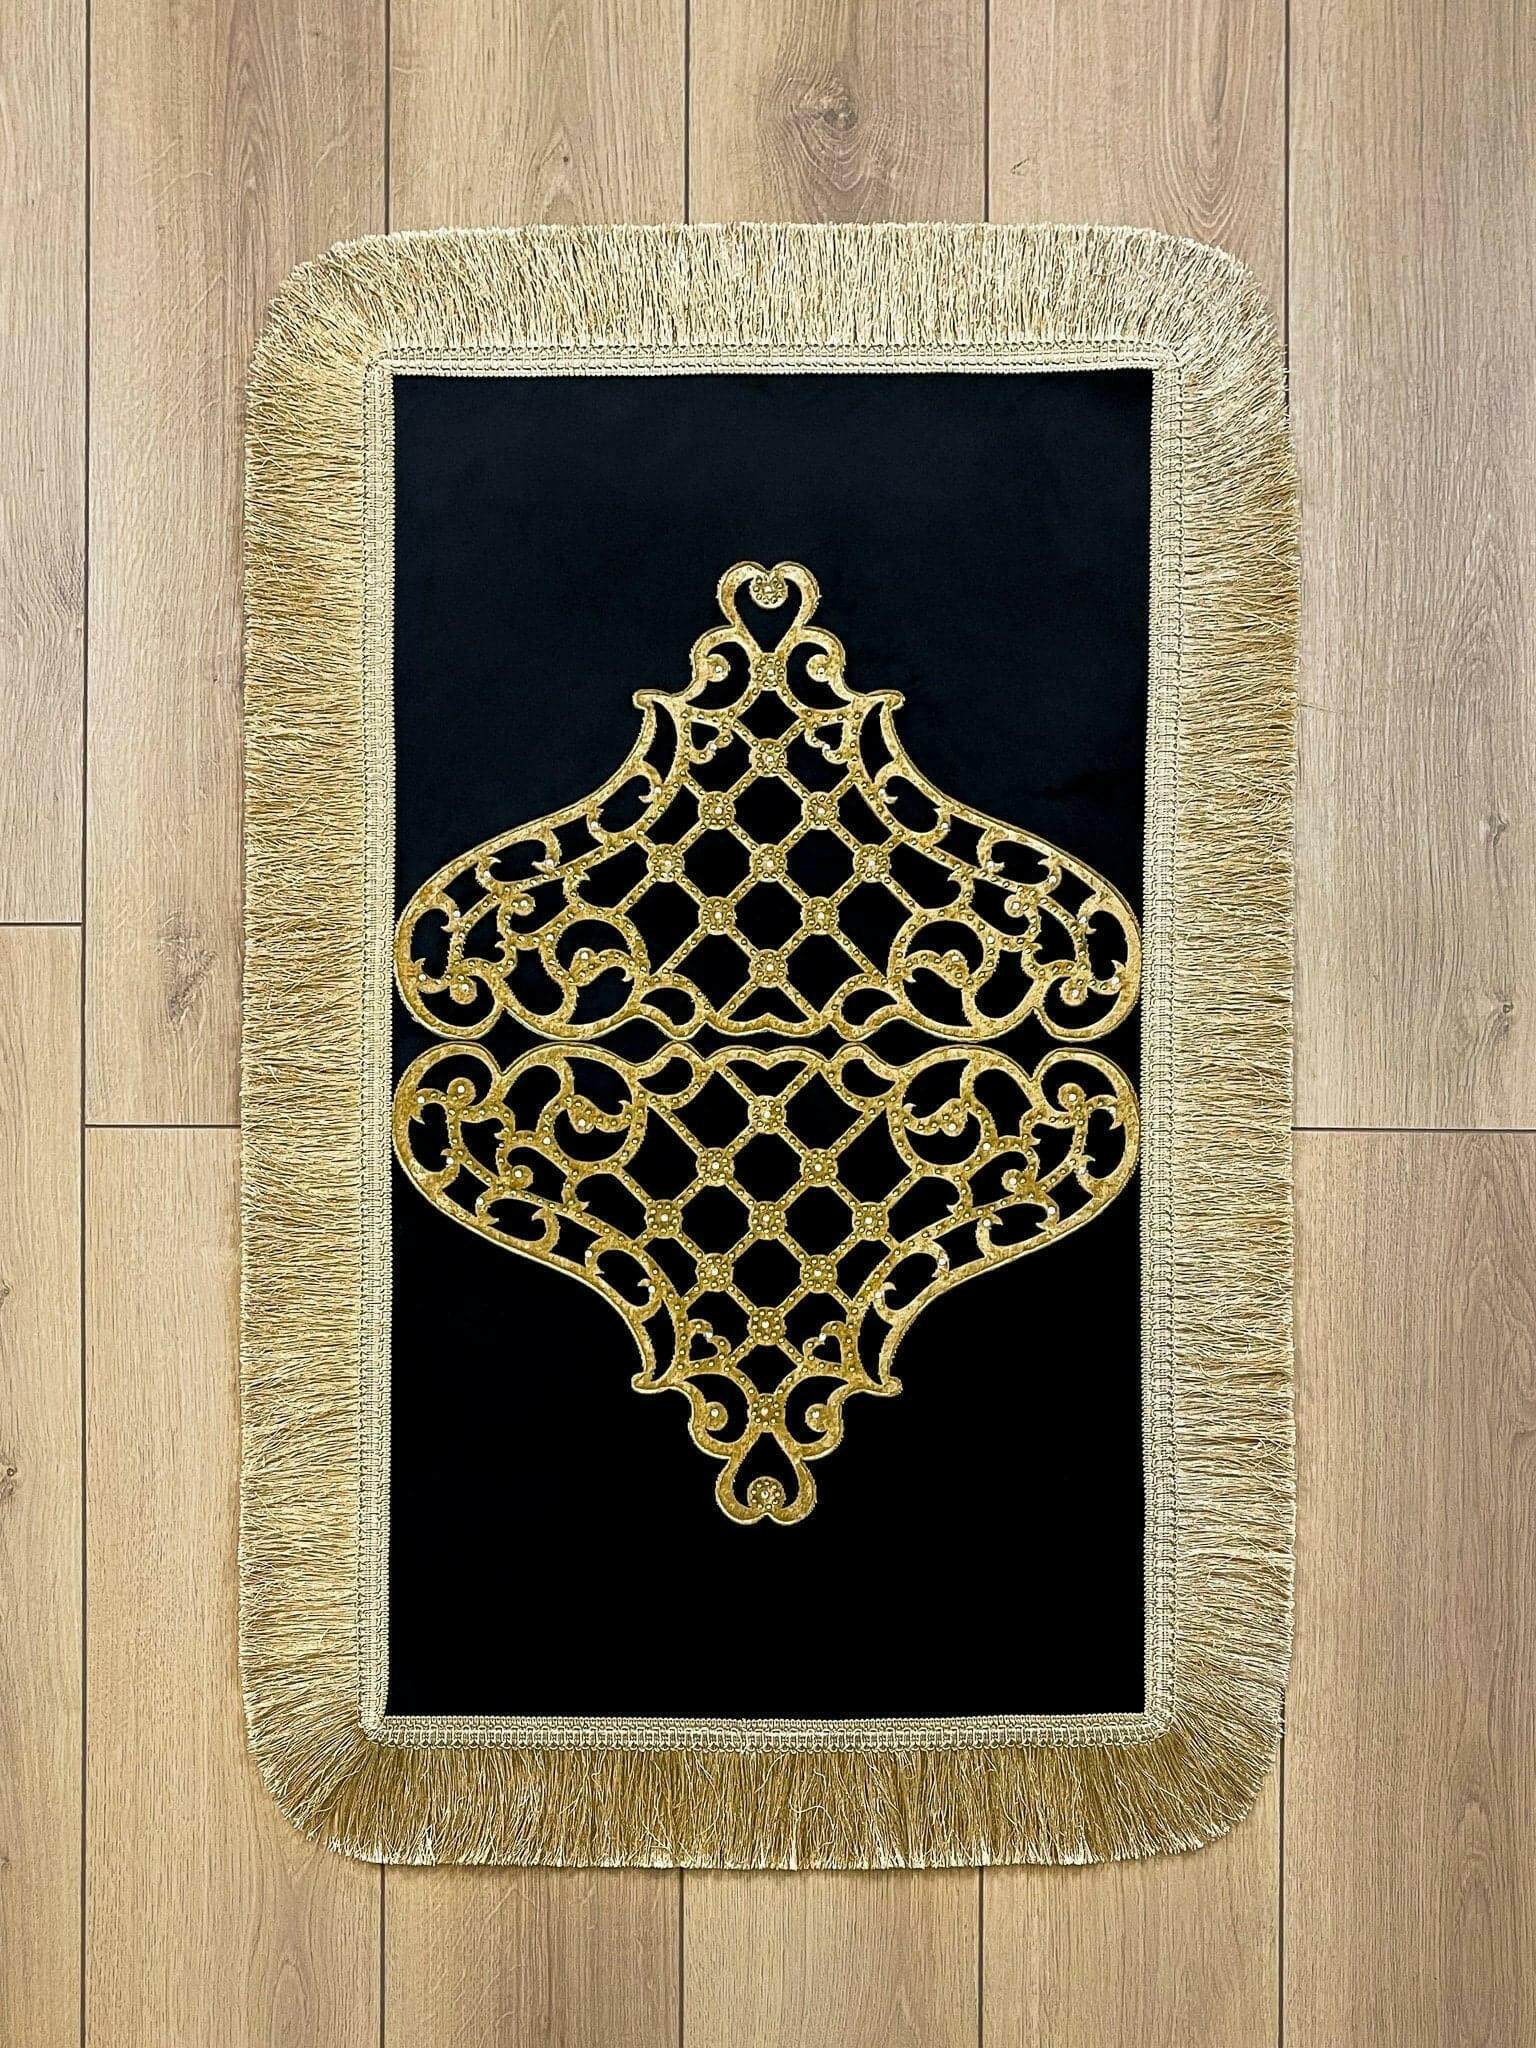 Mihrace Rug Oriental Chic Black & Gold Color Rug - Creative Home Designs Rugs, Oriental Style Turkish Carpet, Rectangular Mat With Diamonds & Tassels